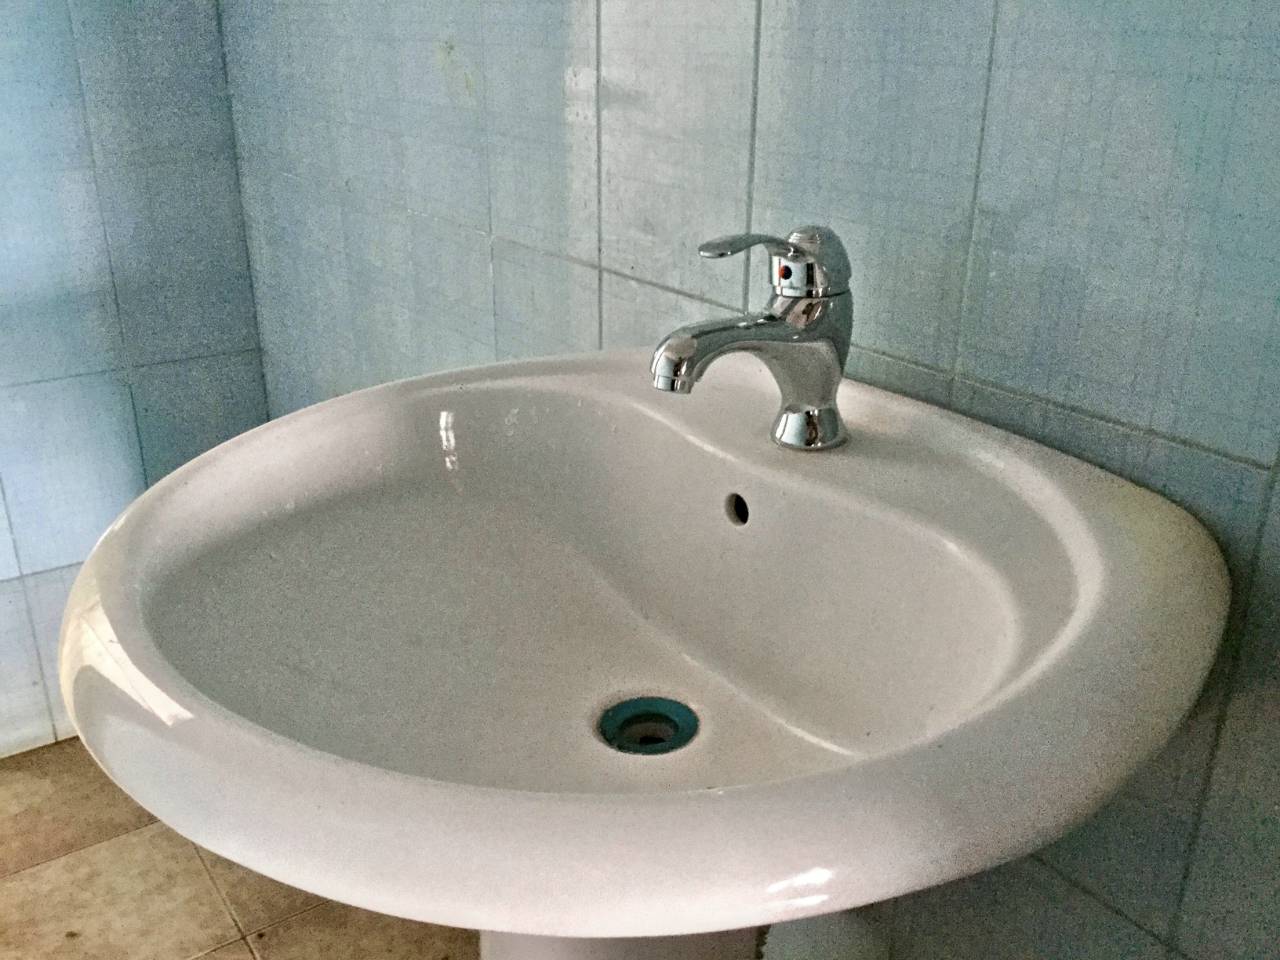 Conclusion of Maqellare School Water and Bathroom Project - Albania